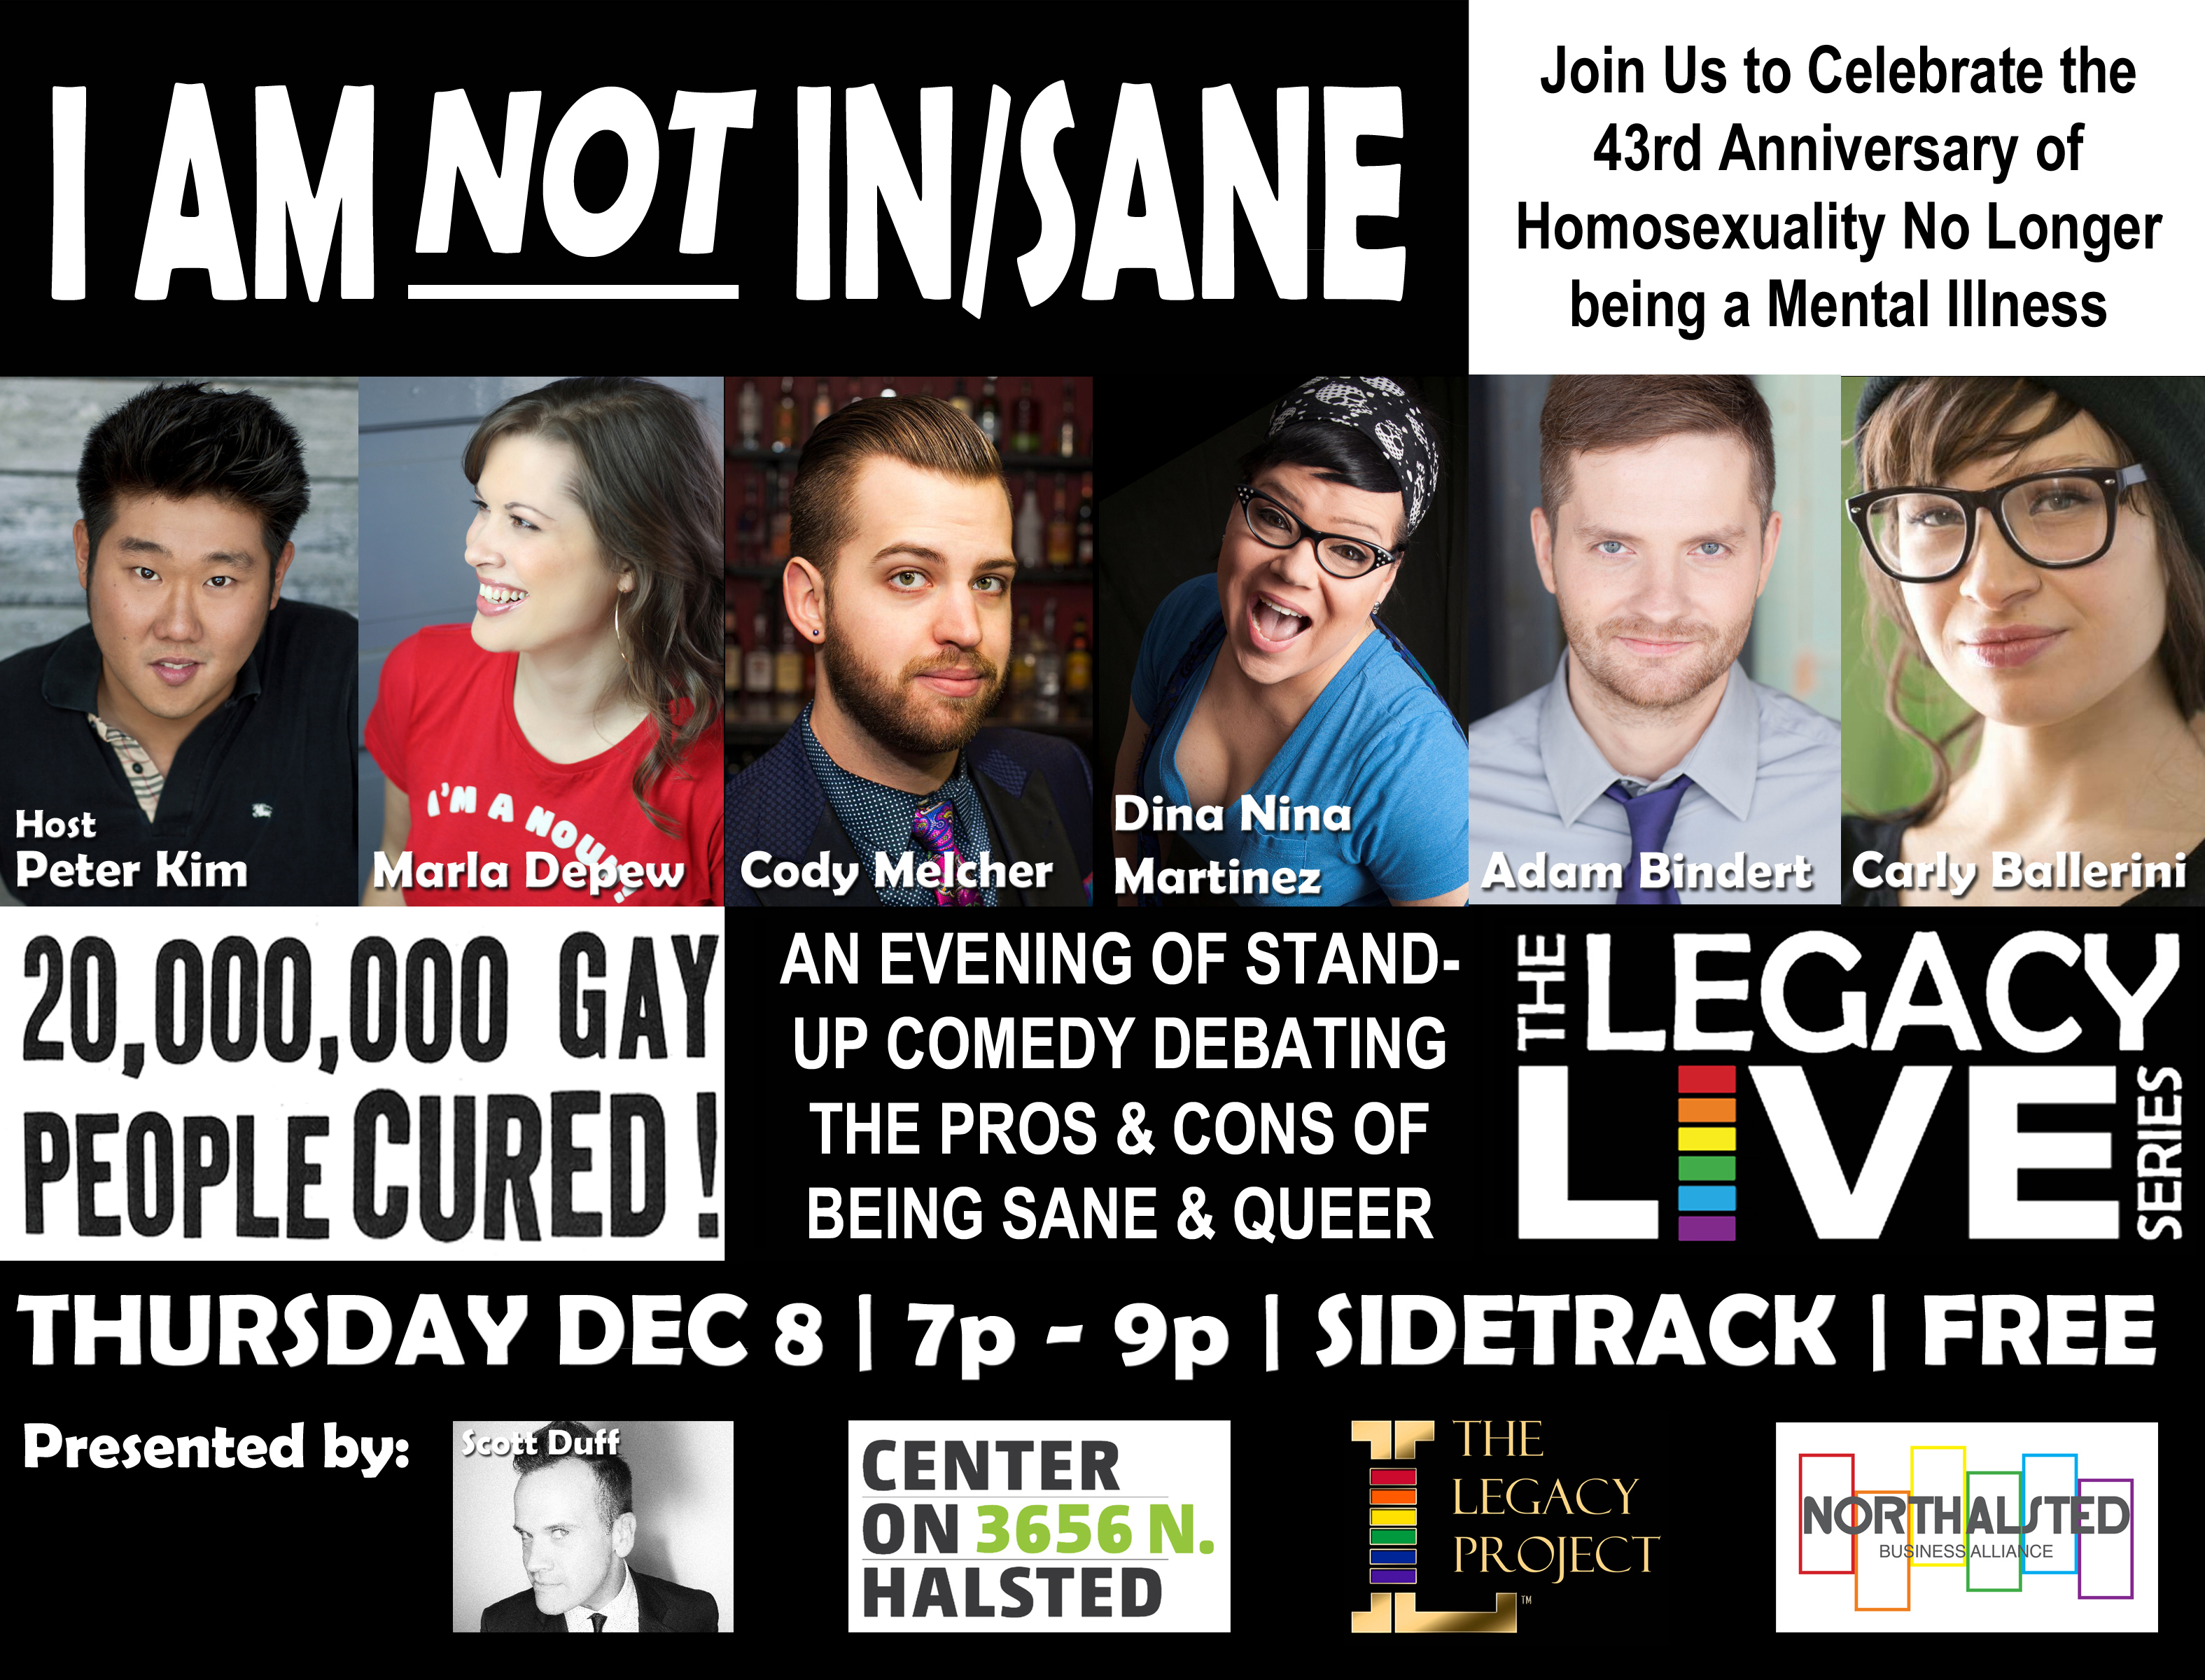 LEGACY LIVE I Am Not InSane Stand-Up Comedy at Sidetrack 2016